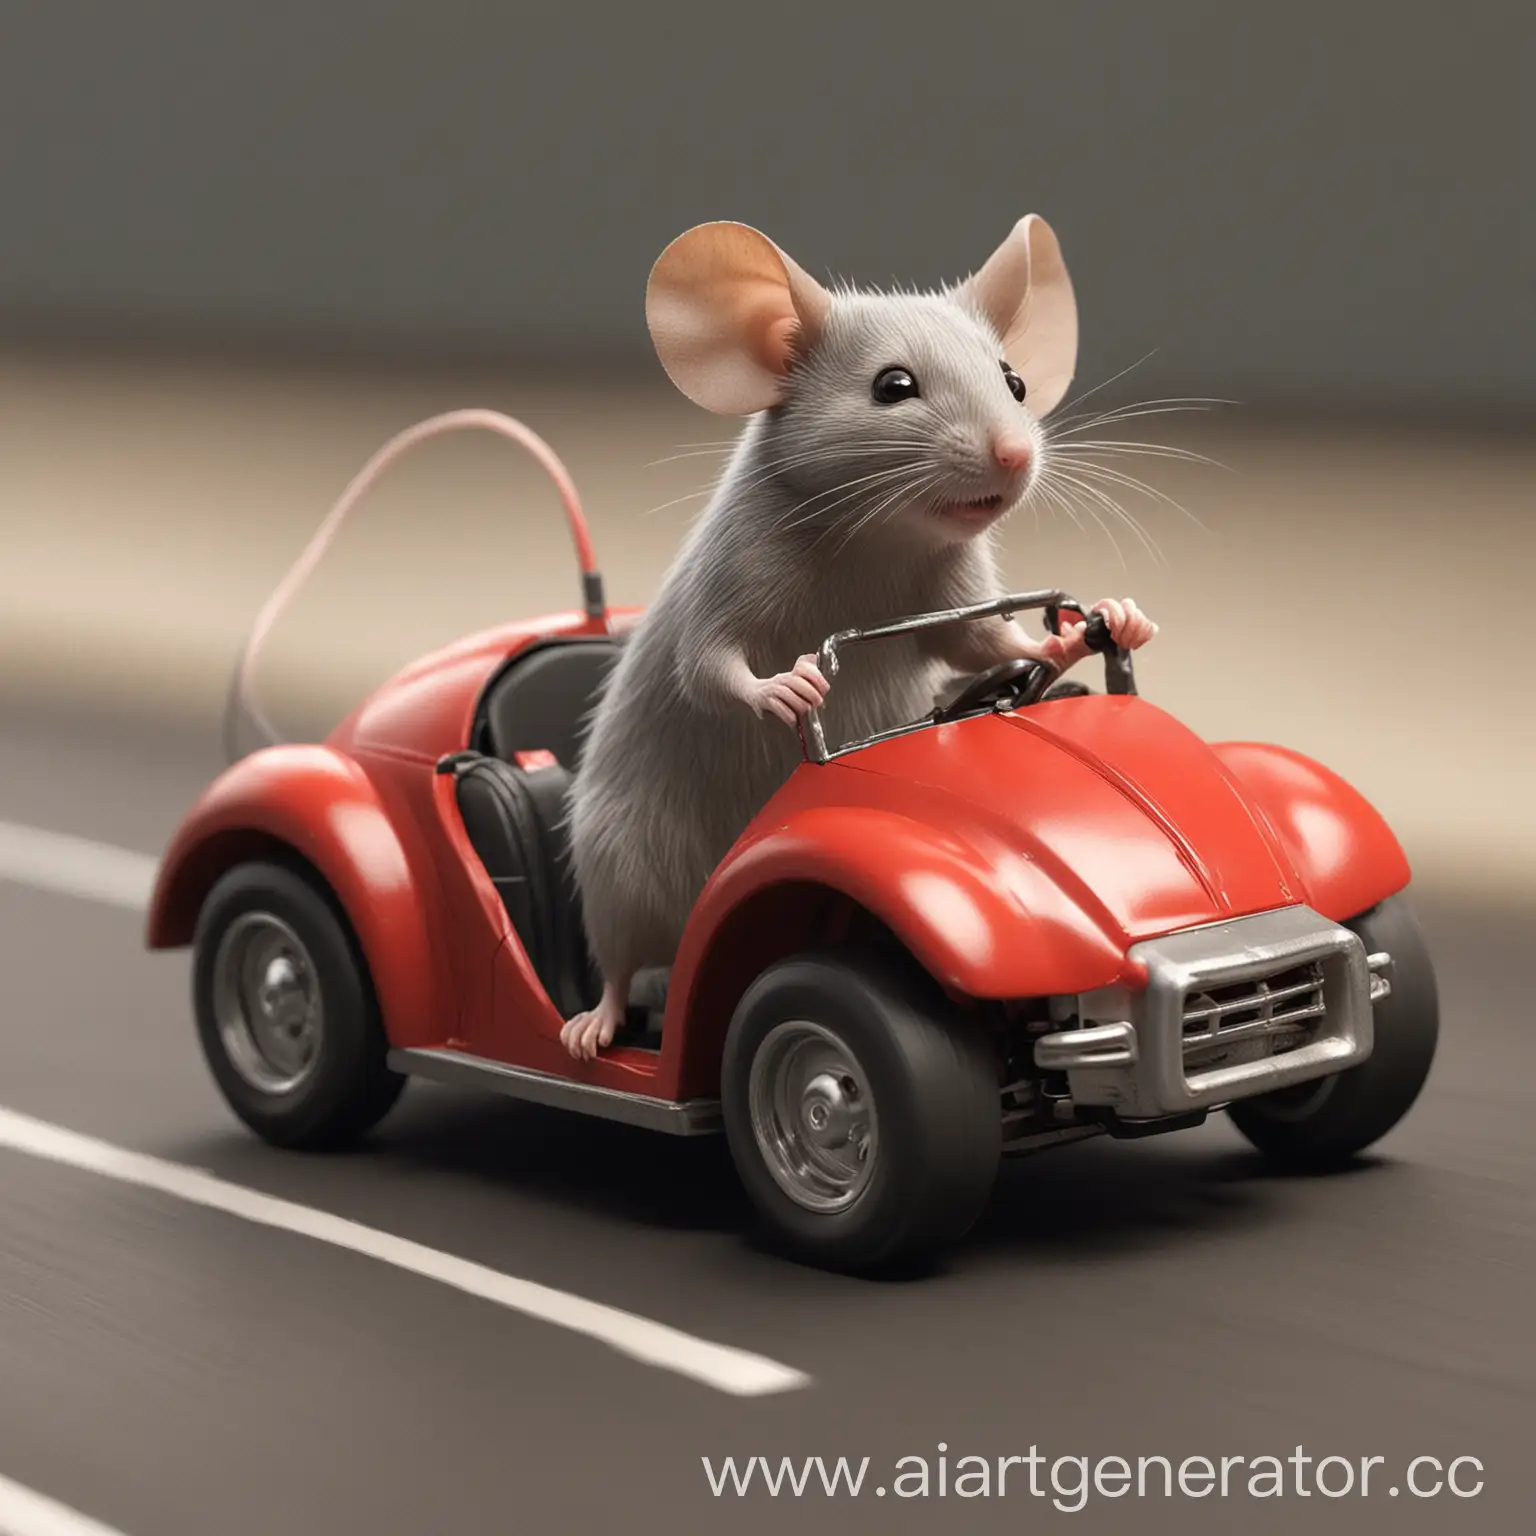 Mouse-Driving-Car-Whimsical-Rodent-Steering-Vehicle-Adventure